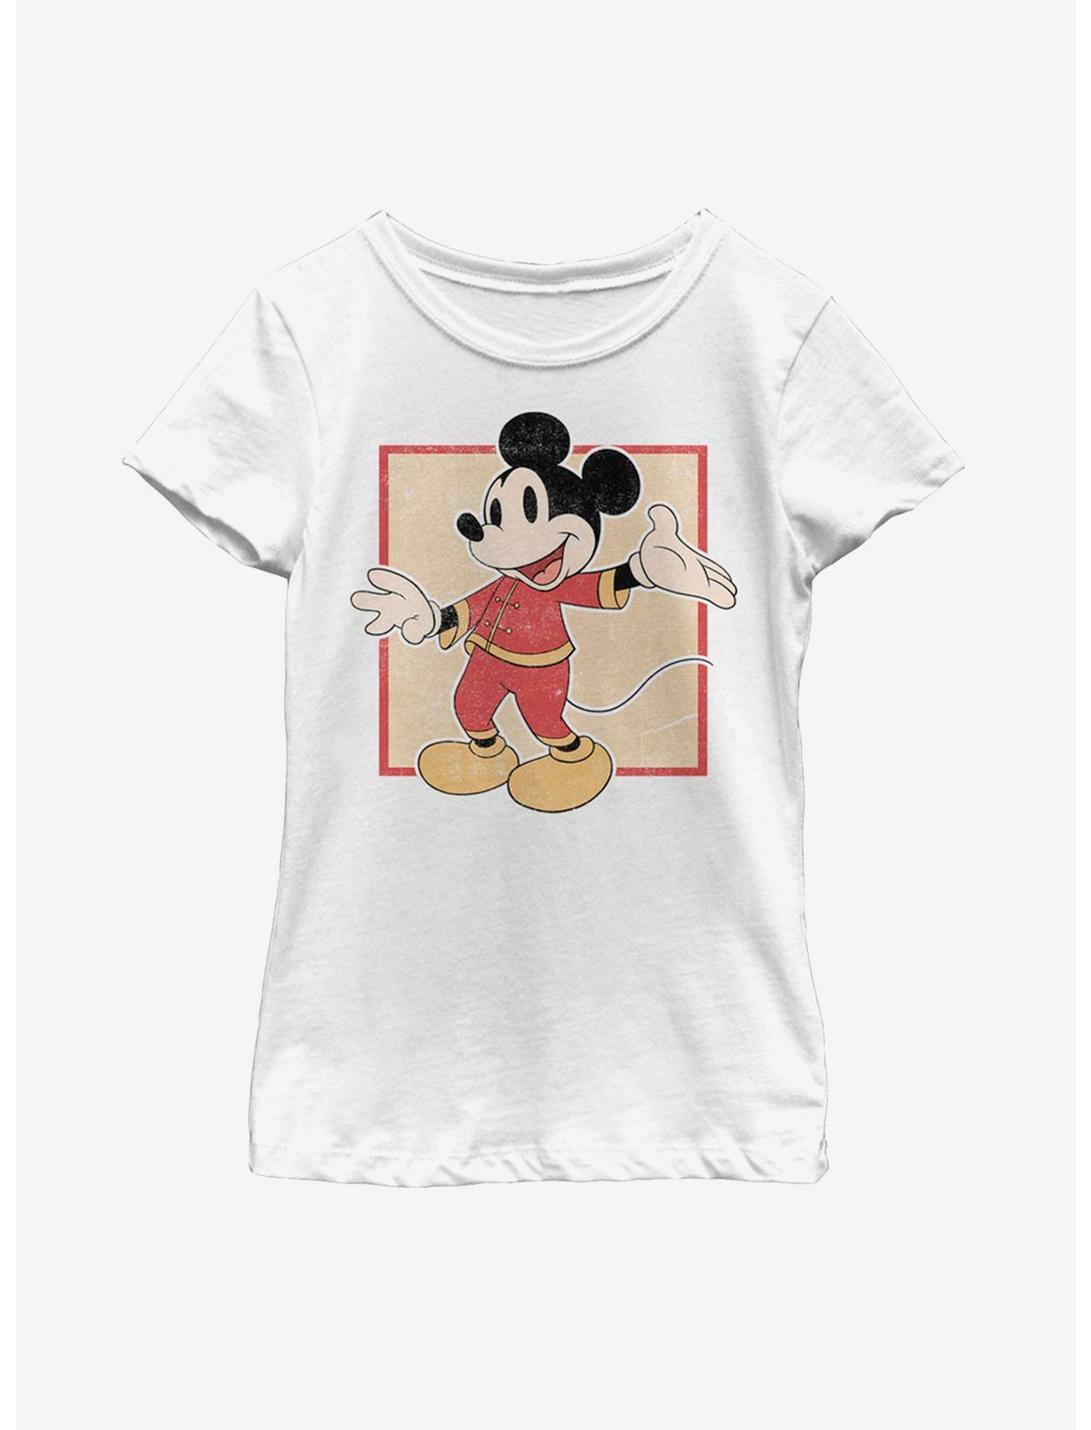 Disney Mickey Mouse Chinese Mickey Youth Girls T-Shirt, WHITE, hi-res